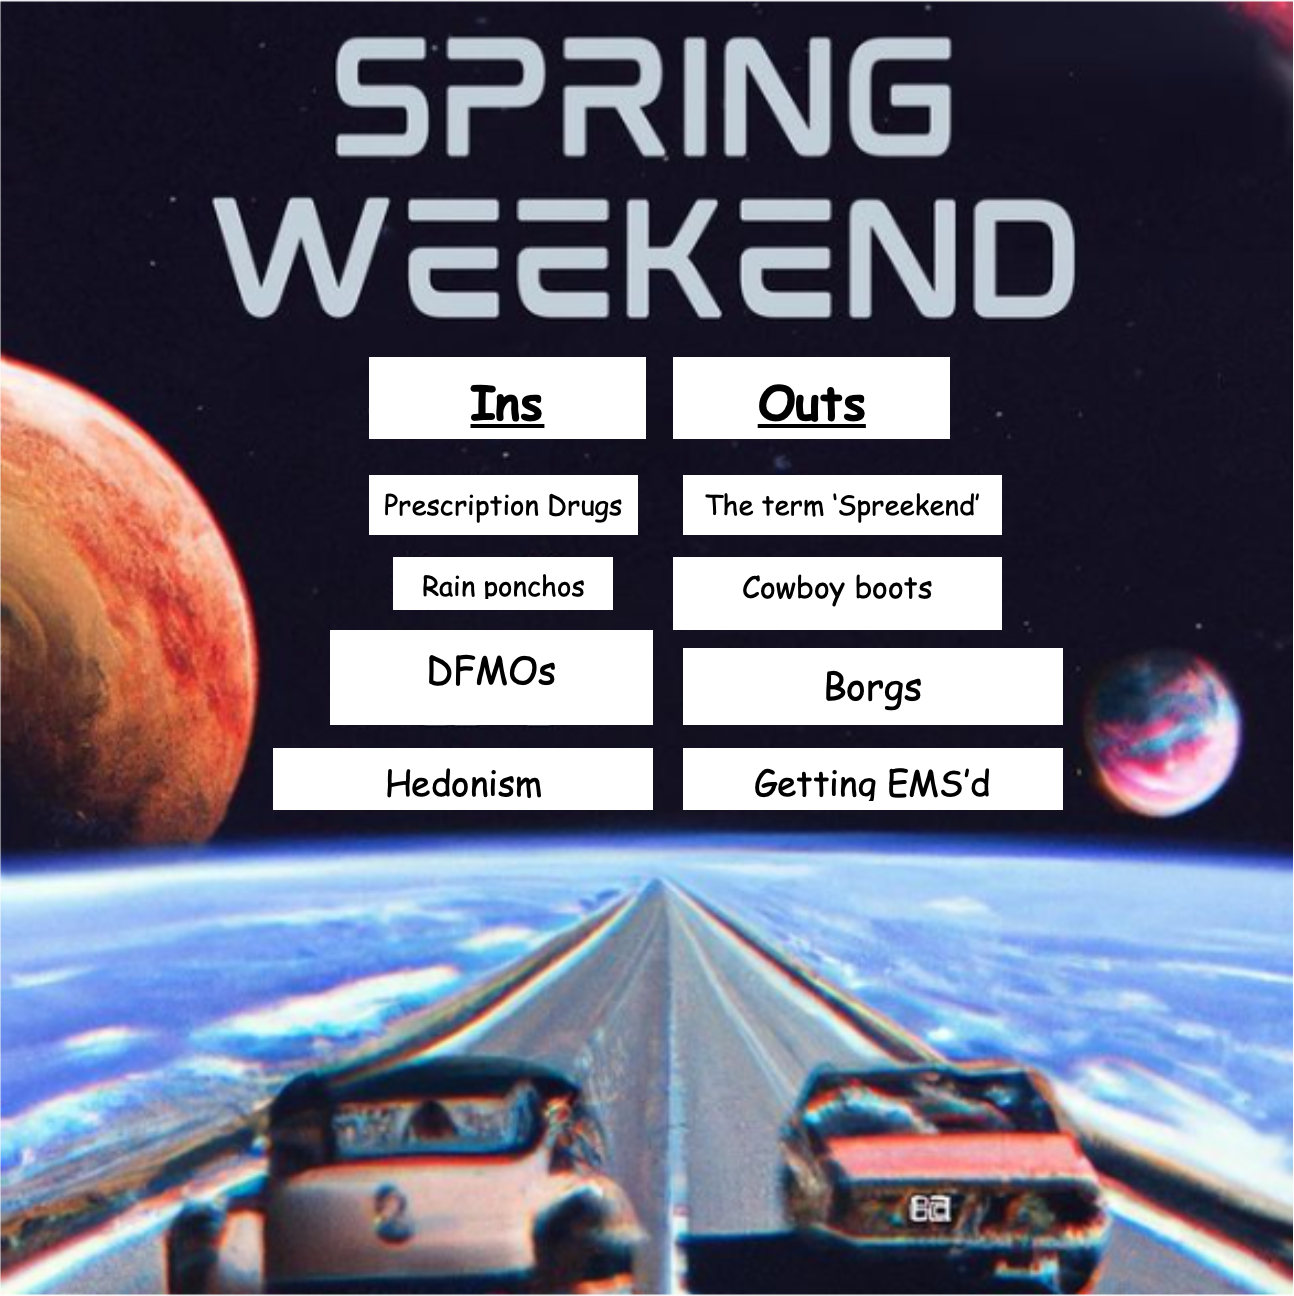 Ins and Outs of Spring Weekend